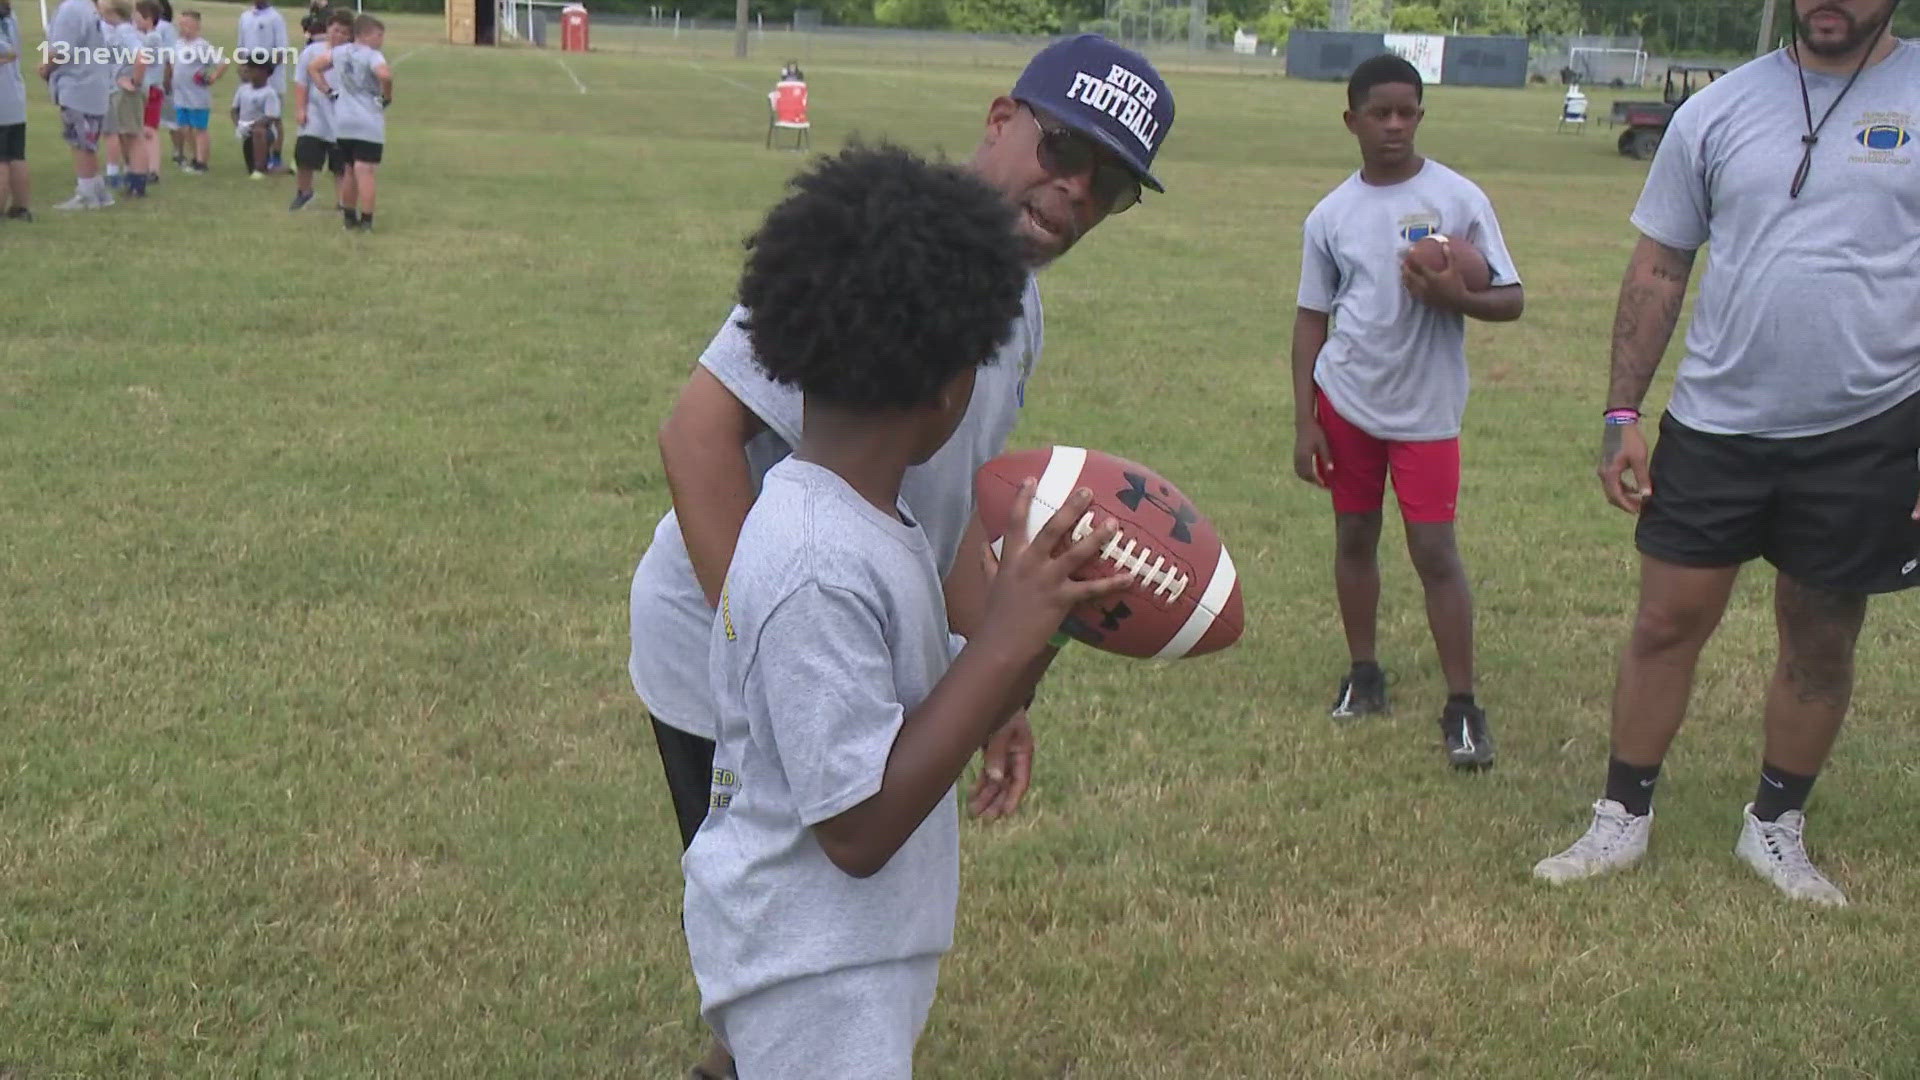 On Friday the Chesapeake Sheriff's Office hosted its annual "Children Today Leaders Tomorrow" youth football camp.